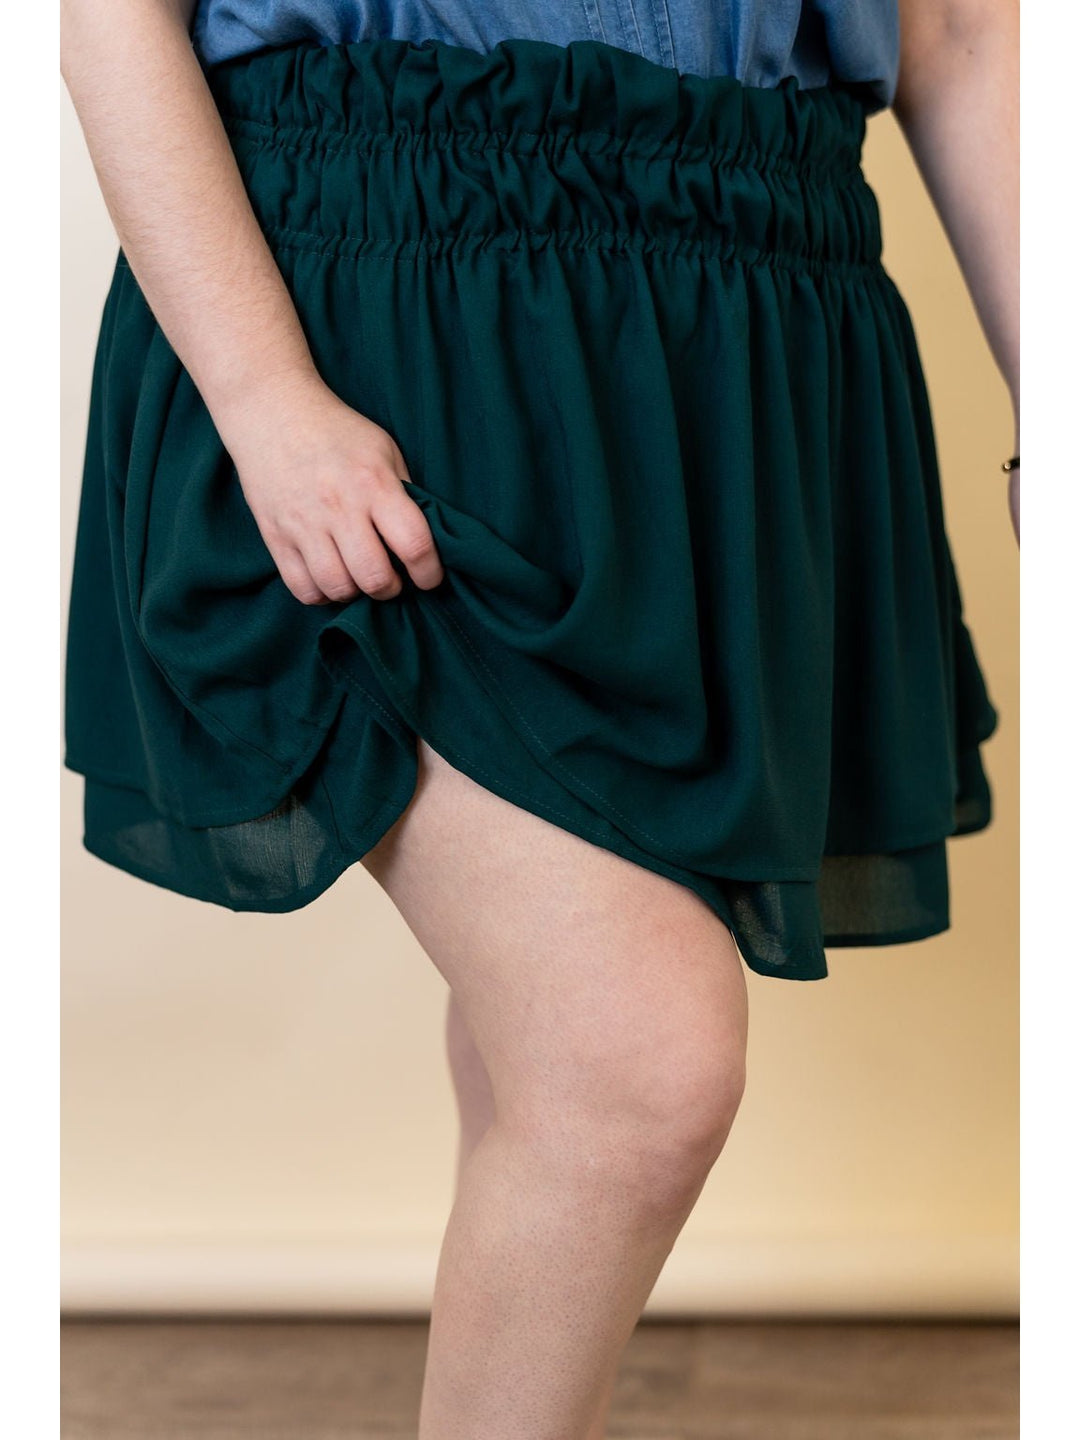 Curvy Green Skirt With Elastic Waistband - Lolo Viv Boutique